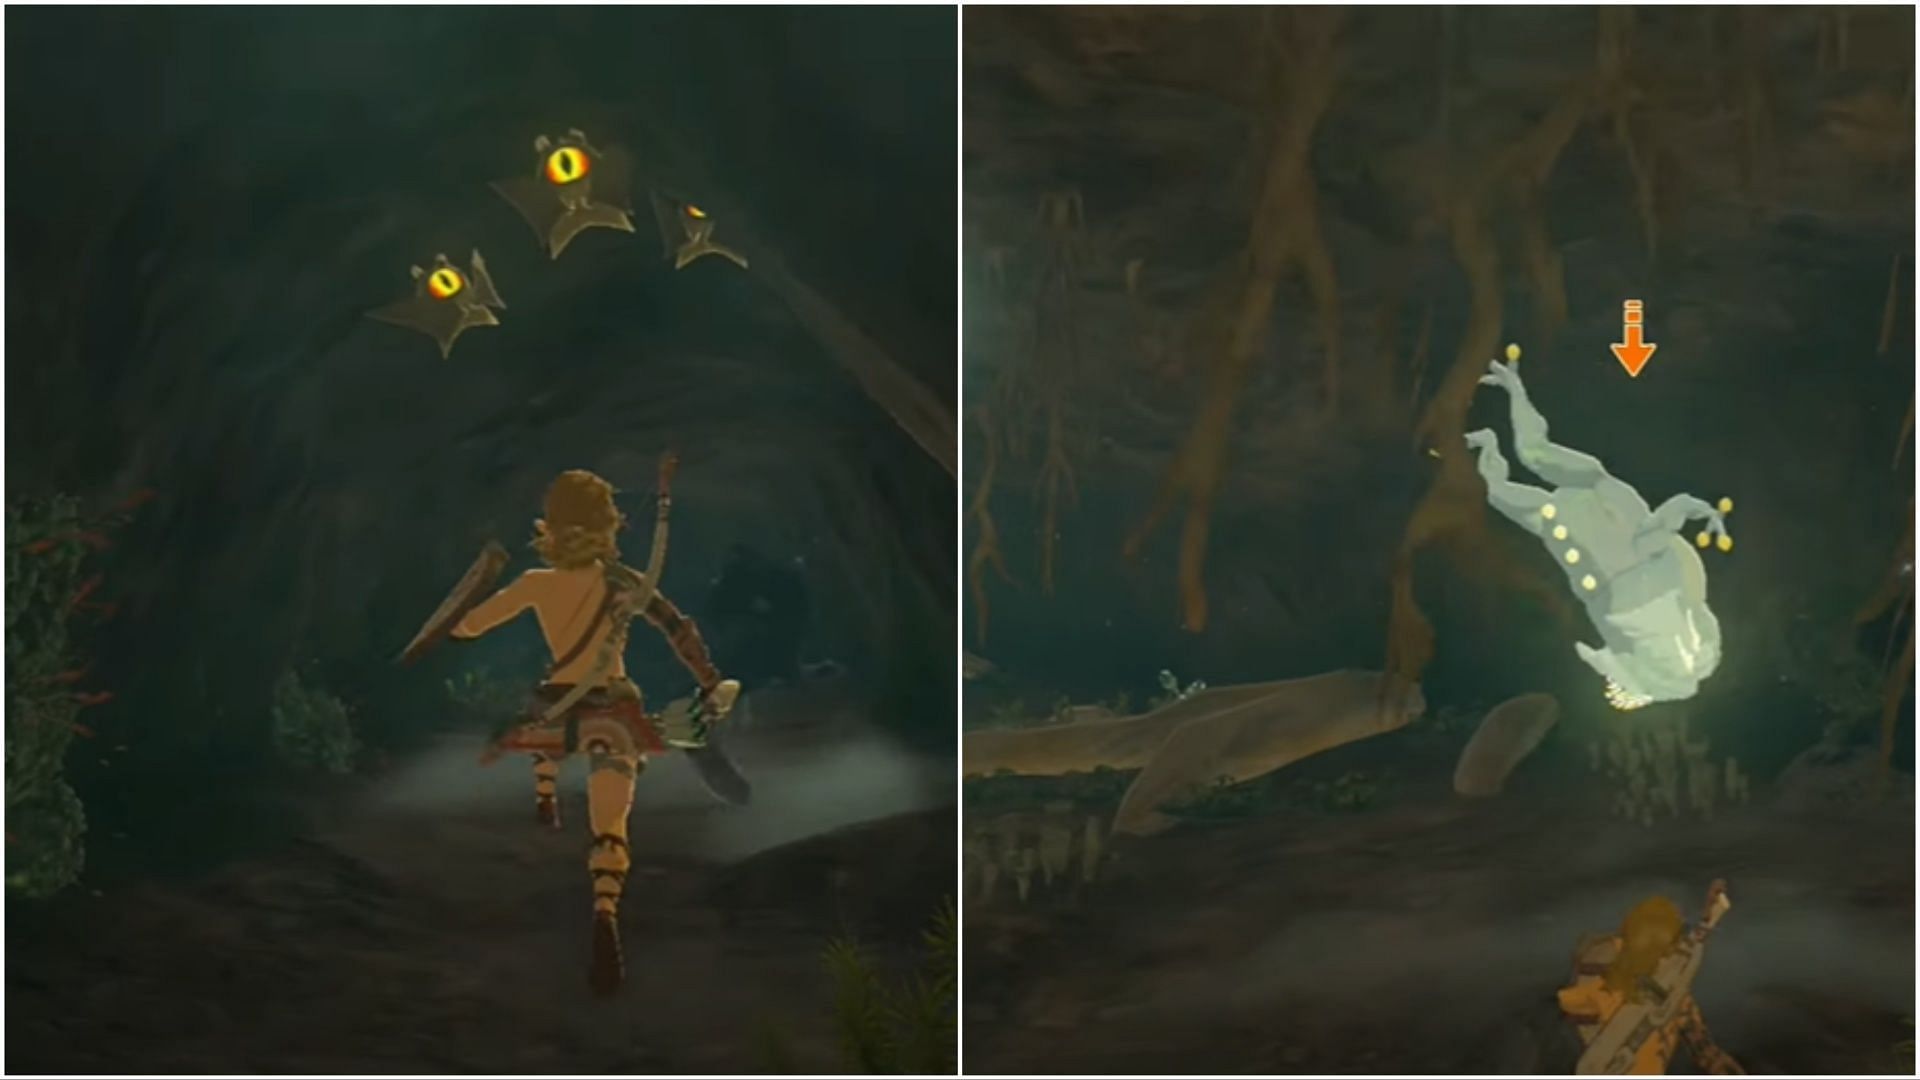 Bats and gigantic frog inside the cave (Image via YouTube/ RIOT GEAR GAMING)